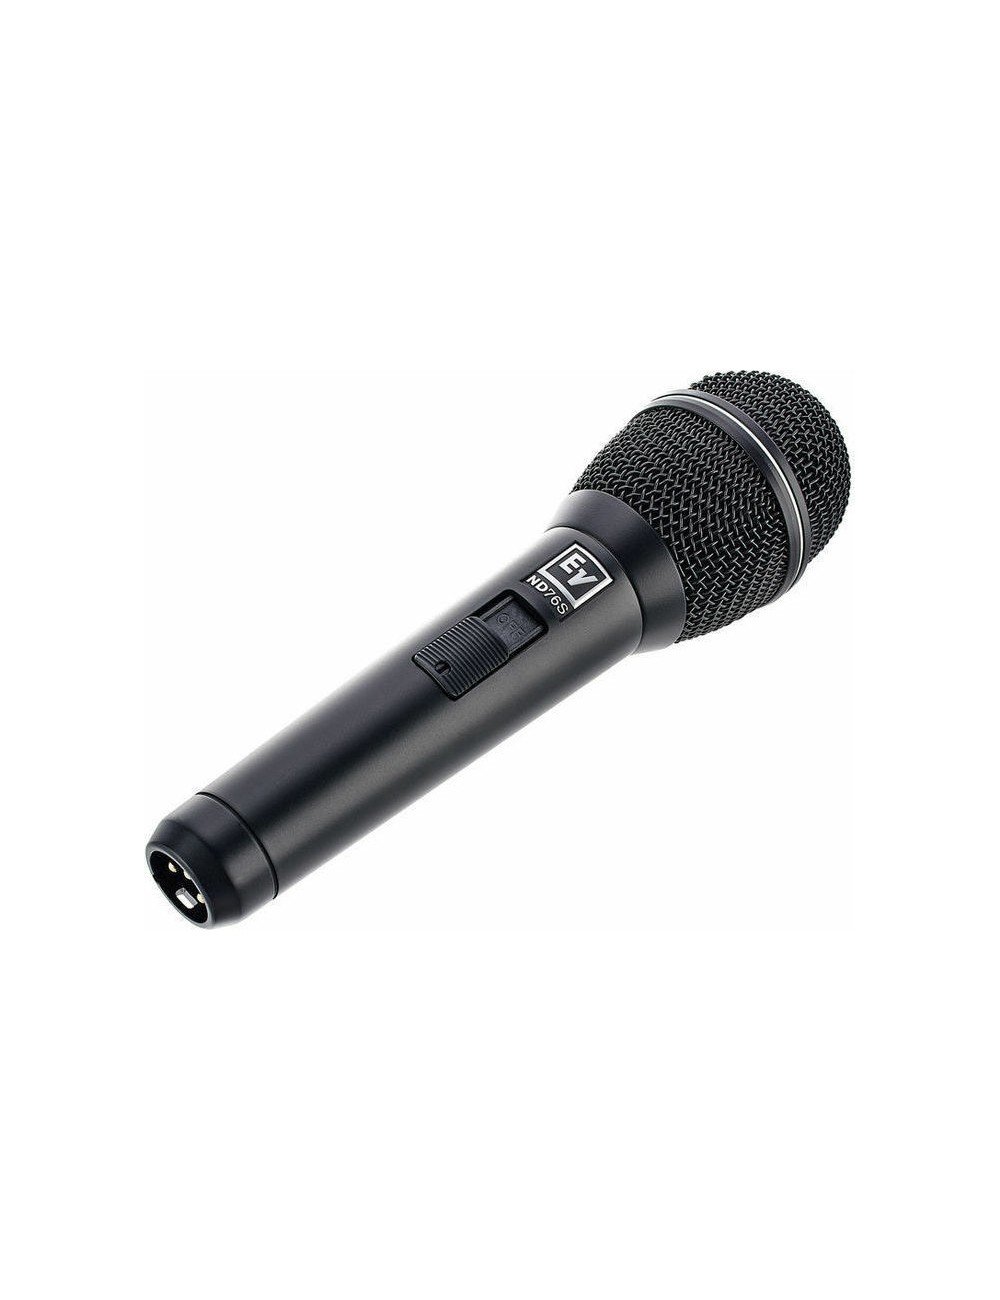 Electrovoice ND76S Dynamic Microphone - 1